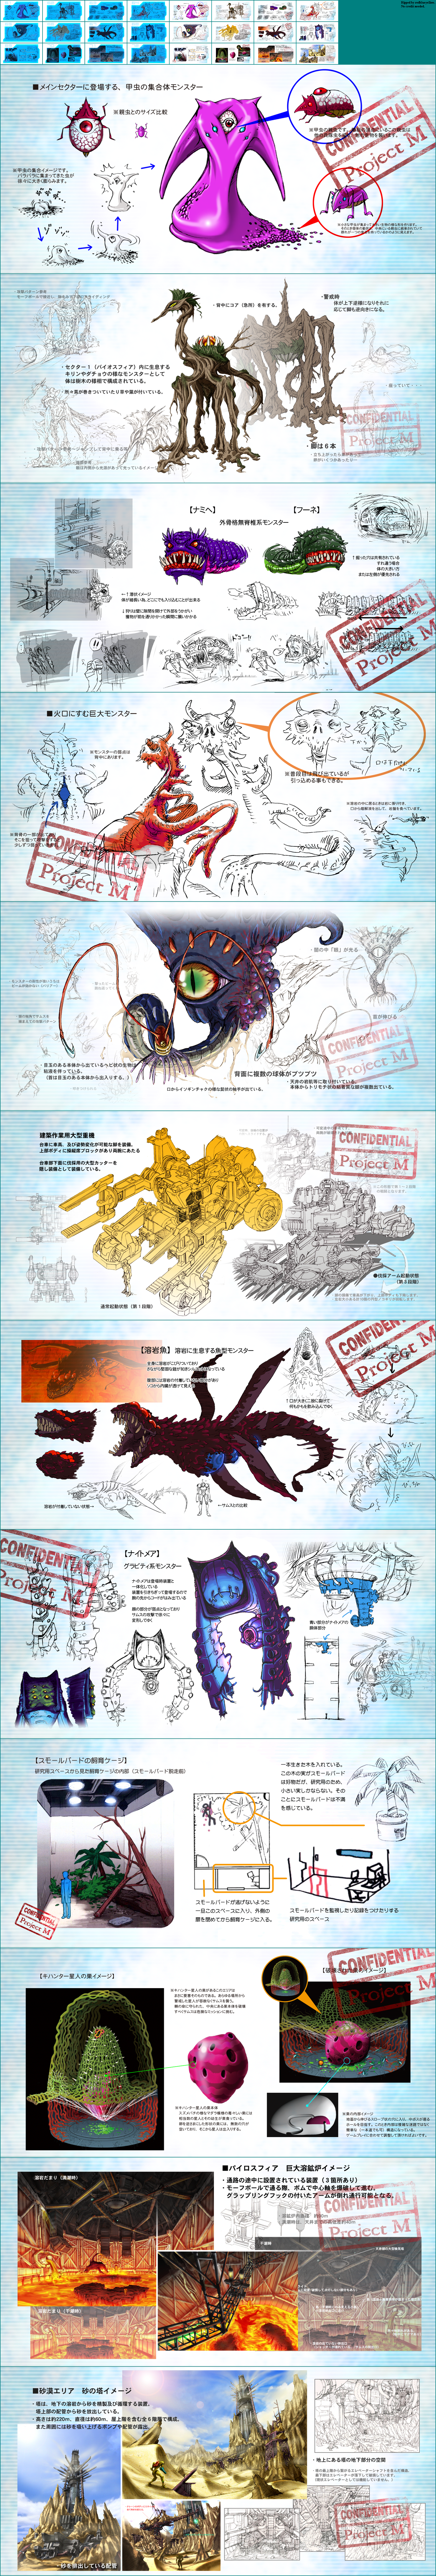 Metroid: Other M - Gallery (Page 6)